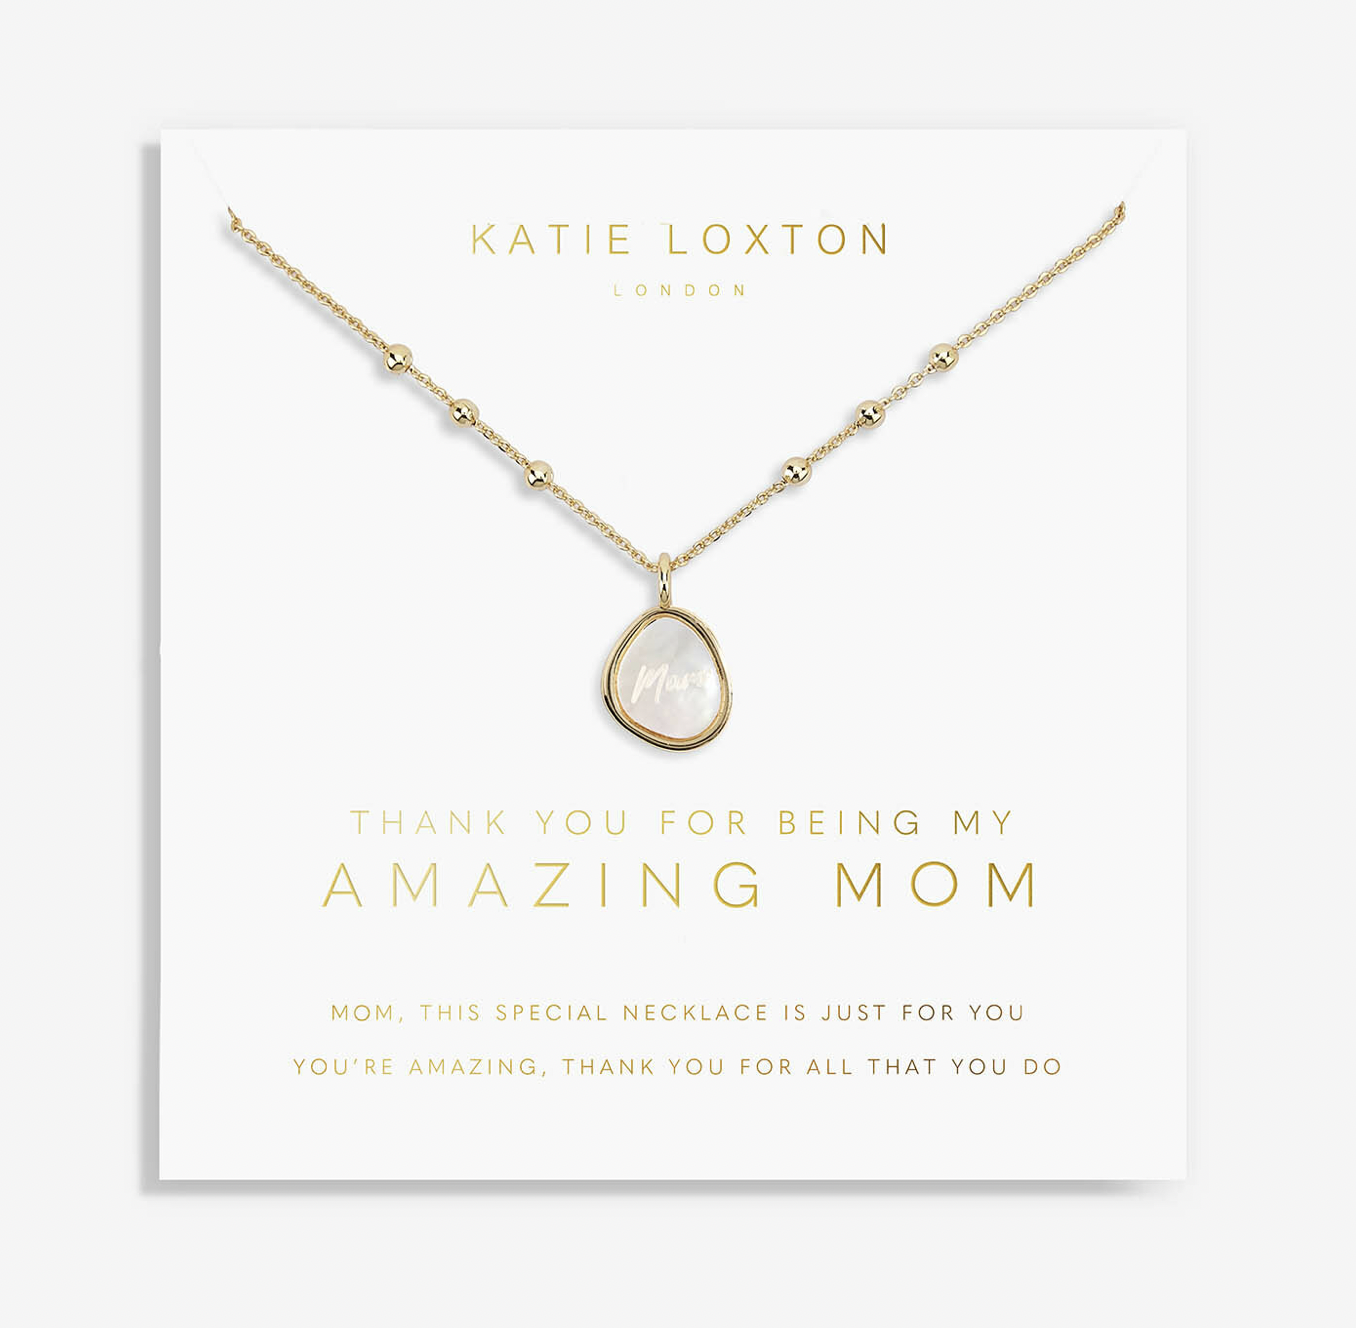 My Moments "Thank You For Being My Amazing Mom" Necklace